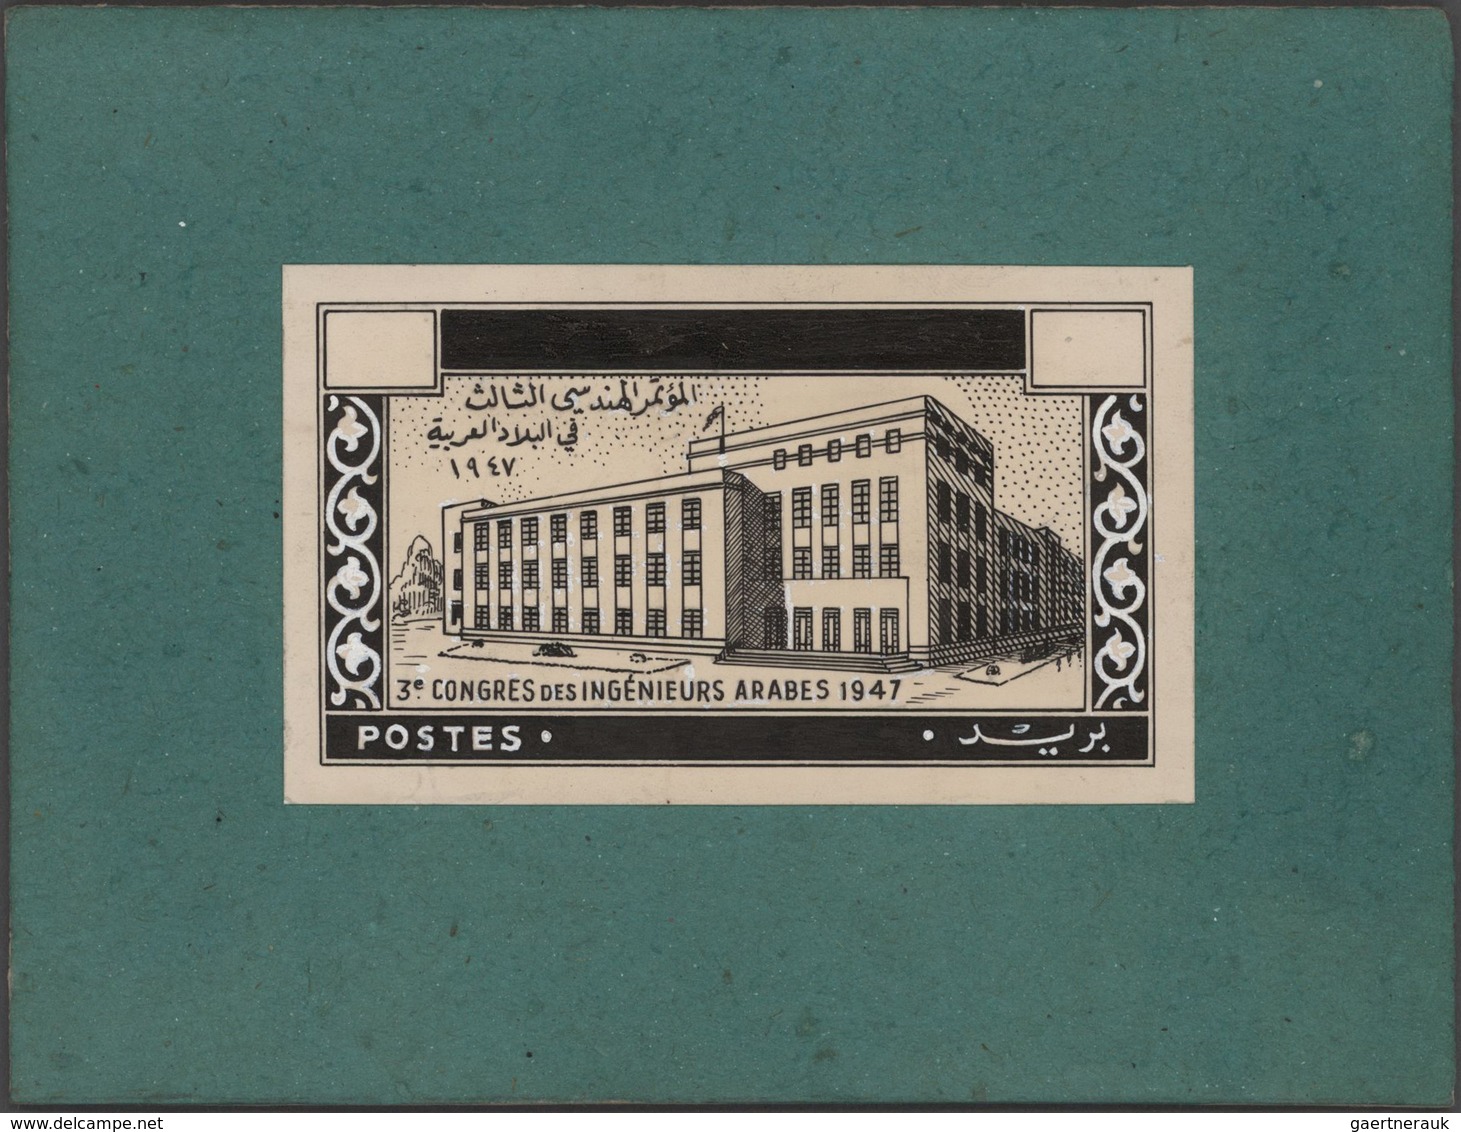 Syrien: 1938/1955. Astonishing collection of 45 ARTIST'S DRAWINGS for stamps of the named period, st